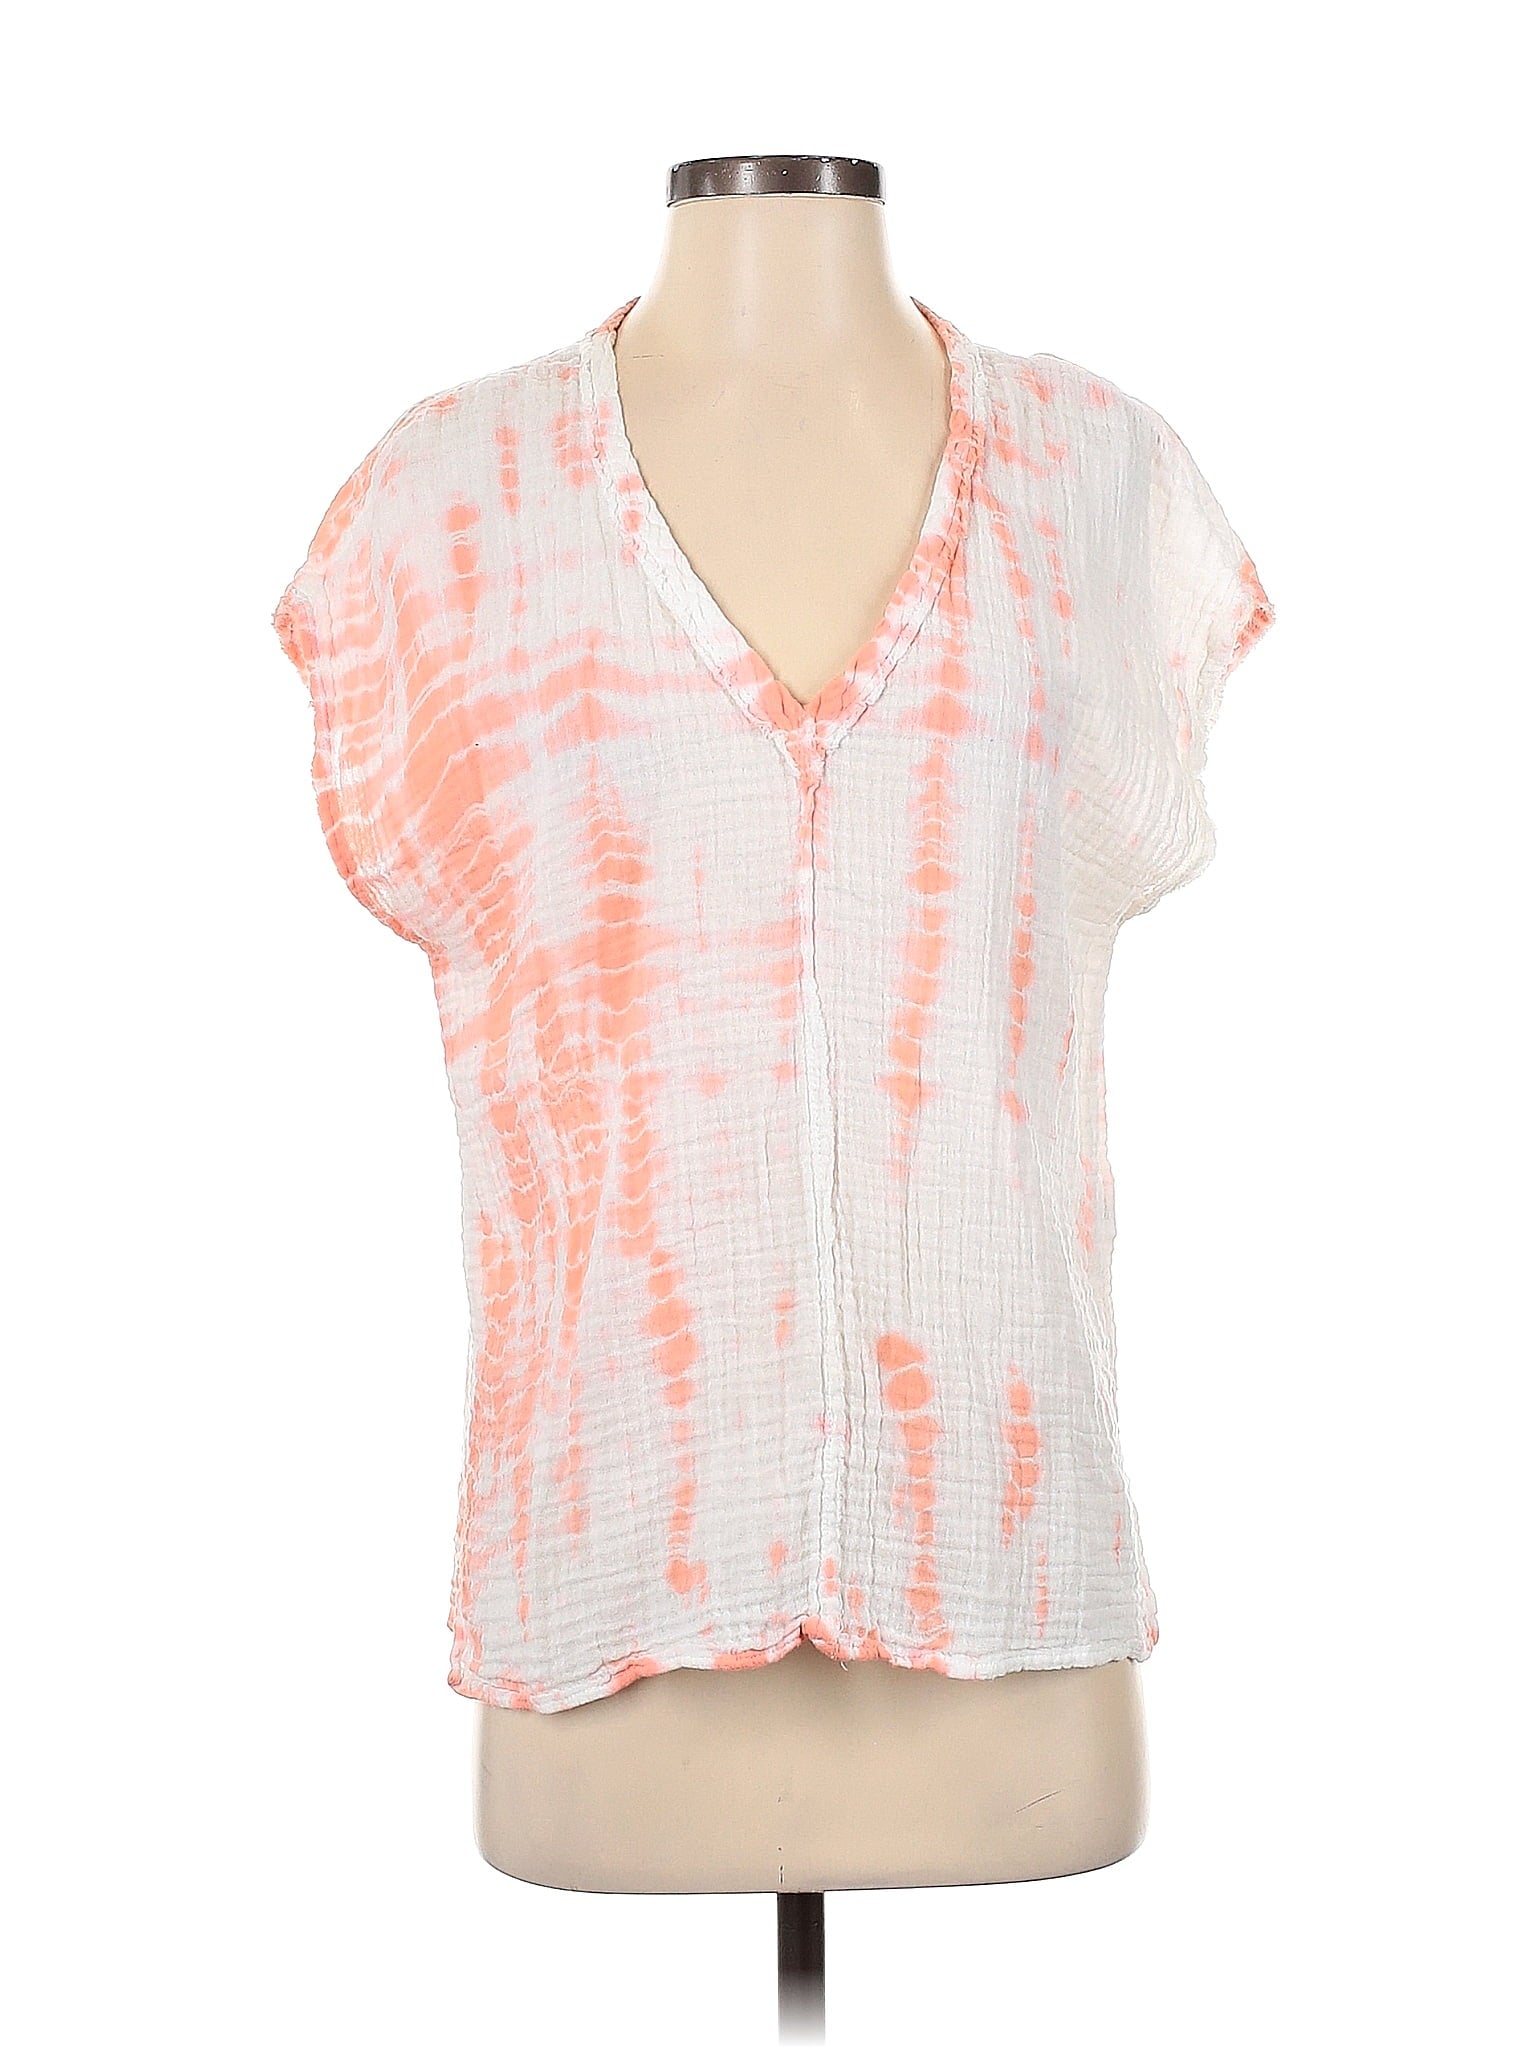 Short Sleeve Top size - S